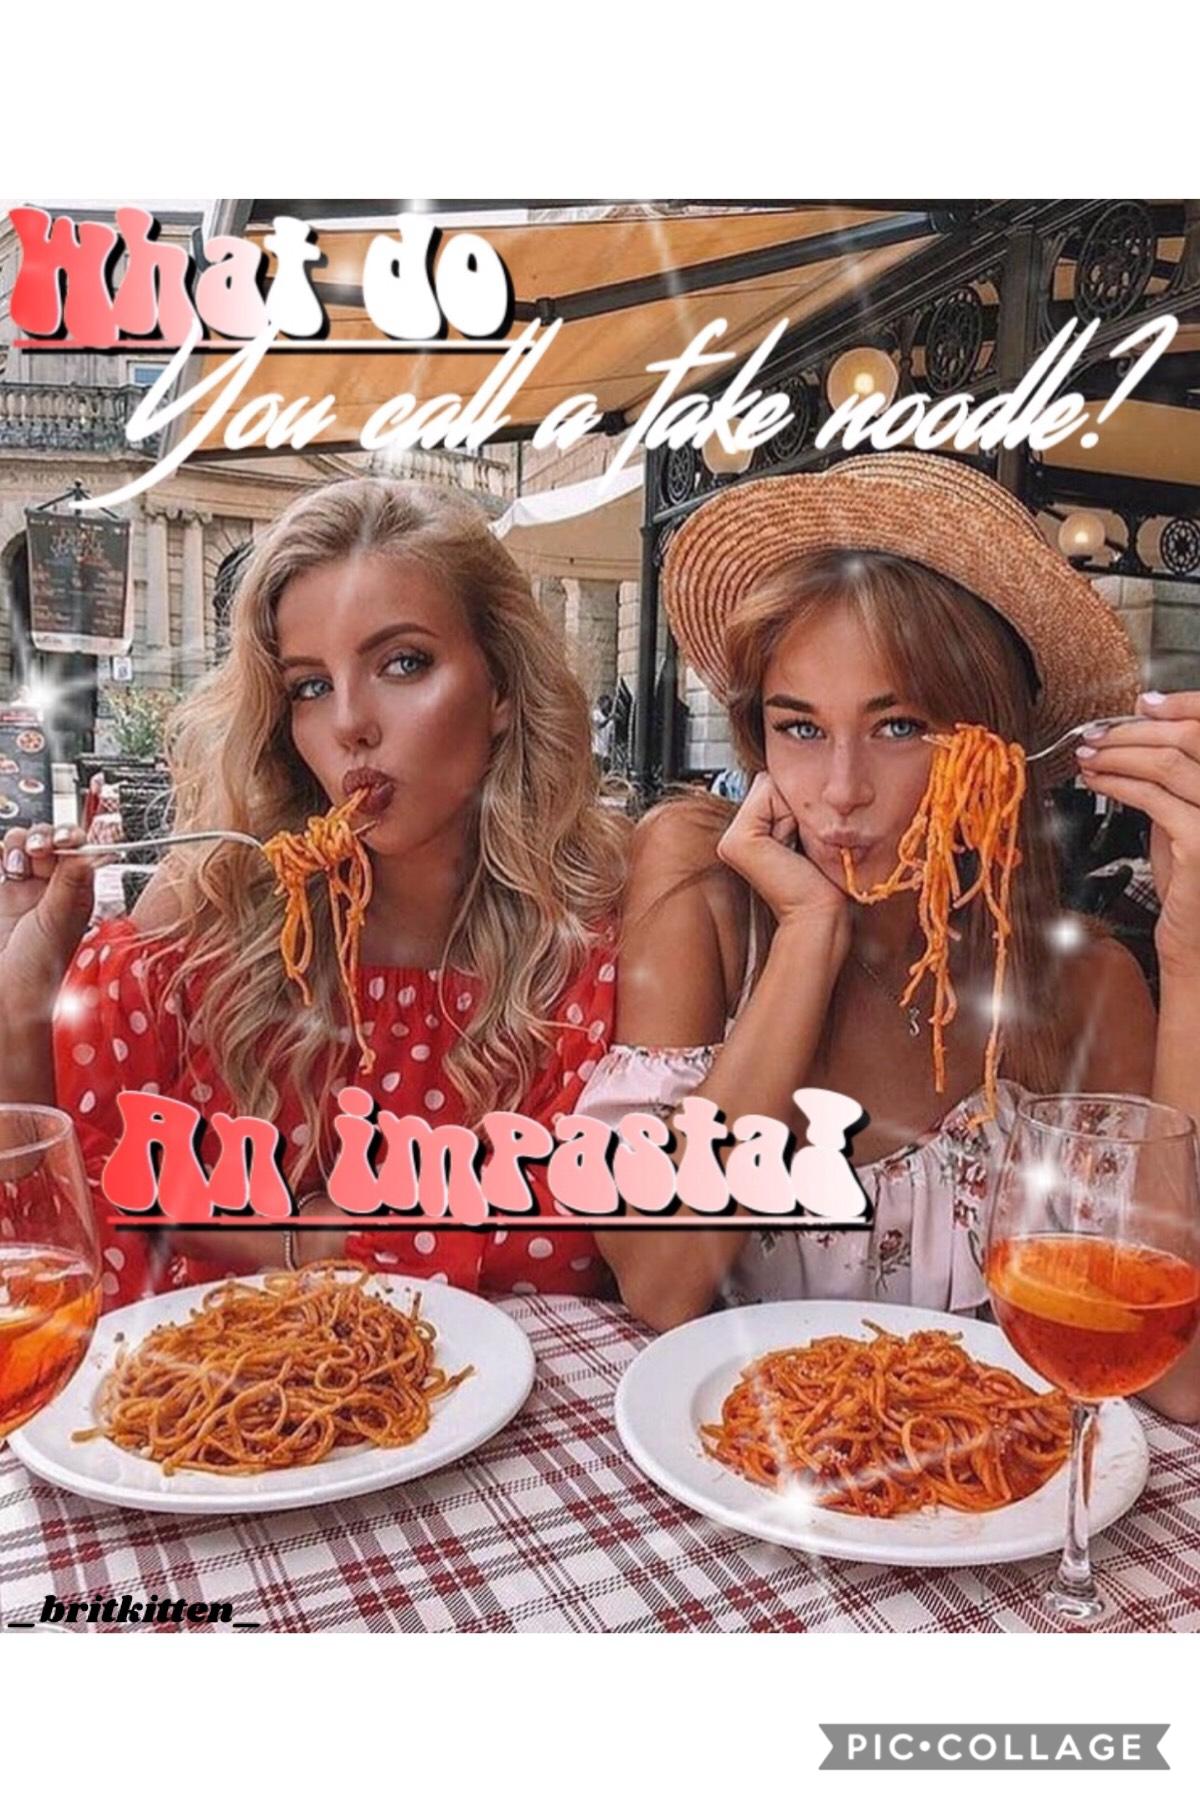 Entry to piccollage’s contest for best dad jokes! I LOVE THIS ONE 😂 QOTD- do u like spaghetti? AOTD- yes!! 🍝 is my favorite!